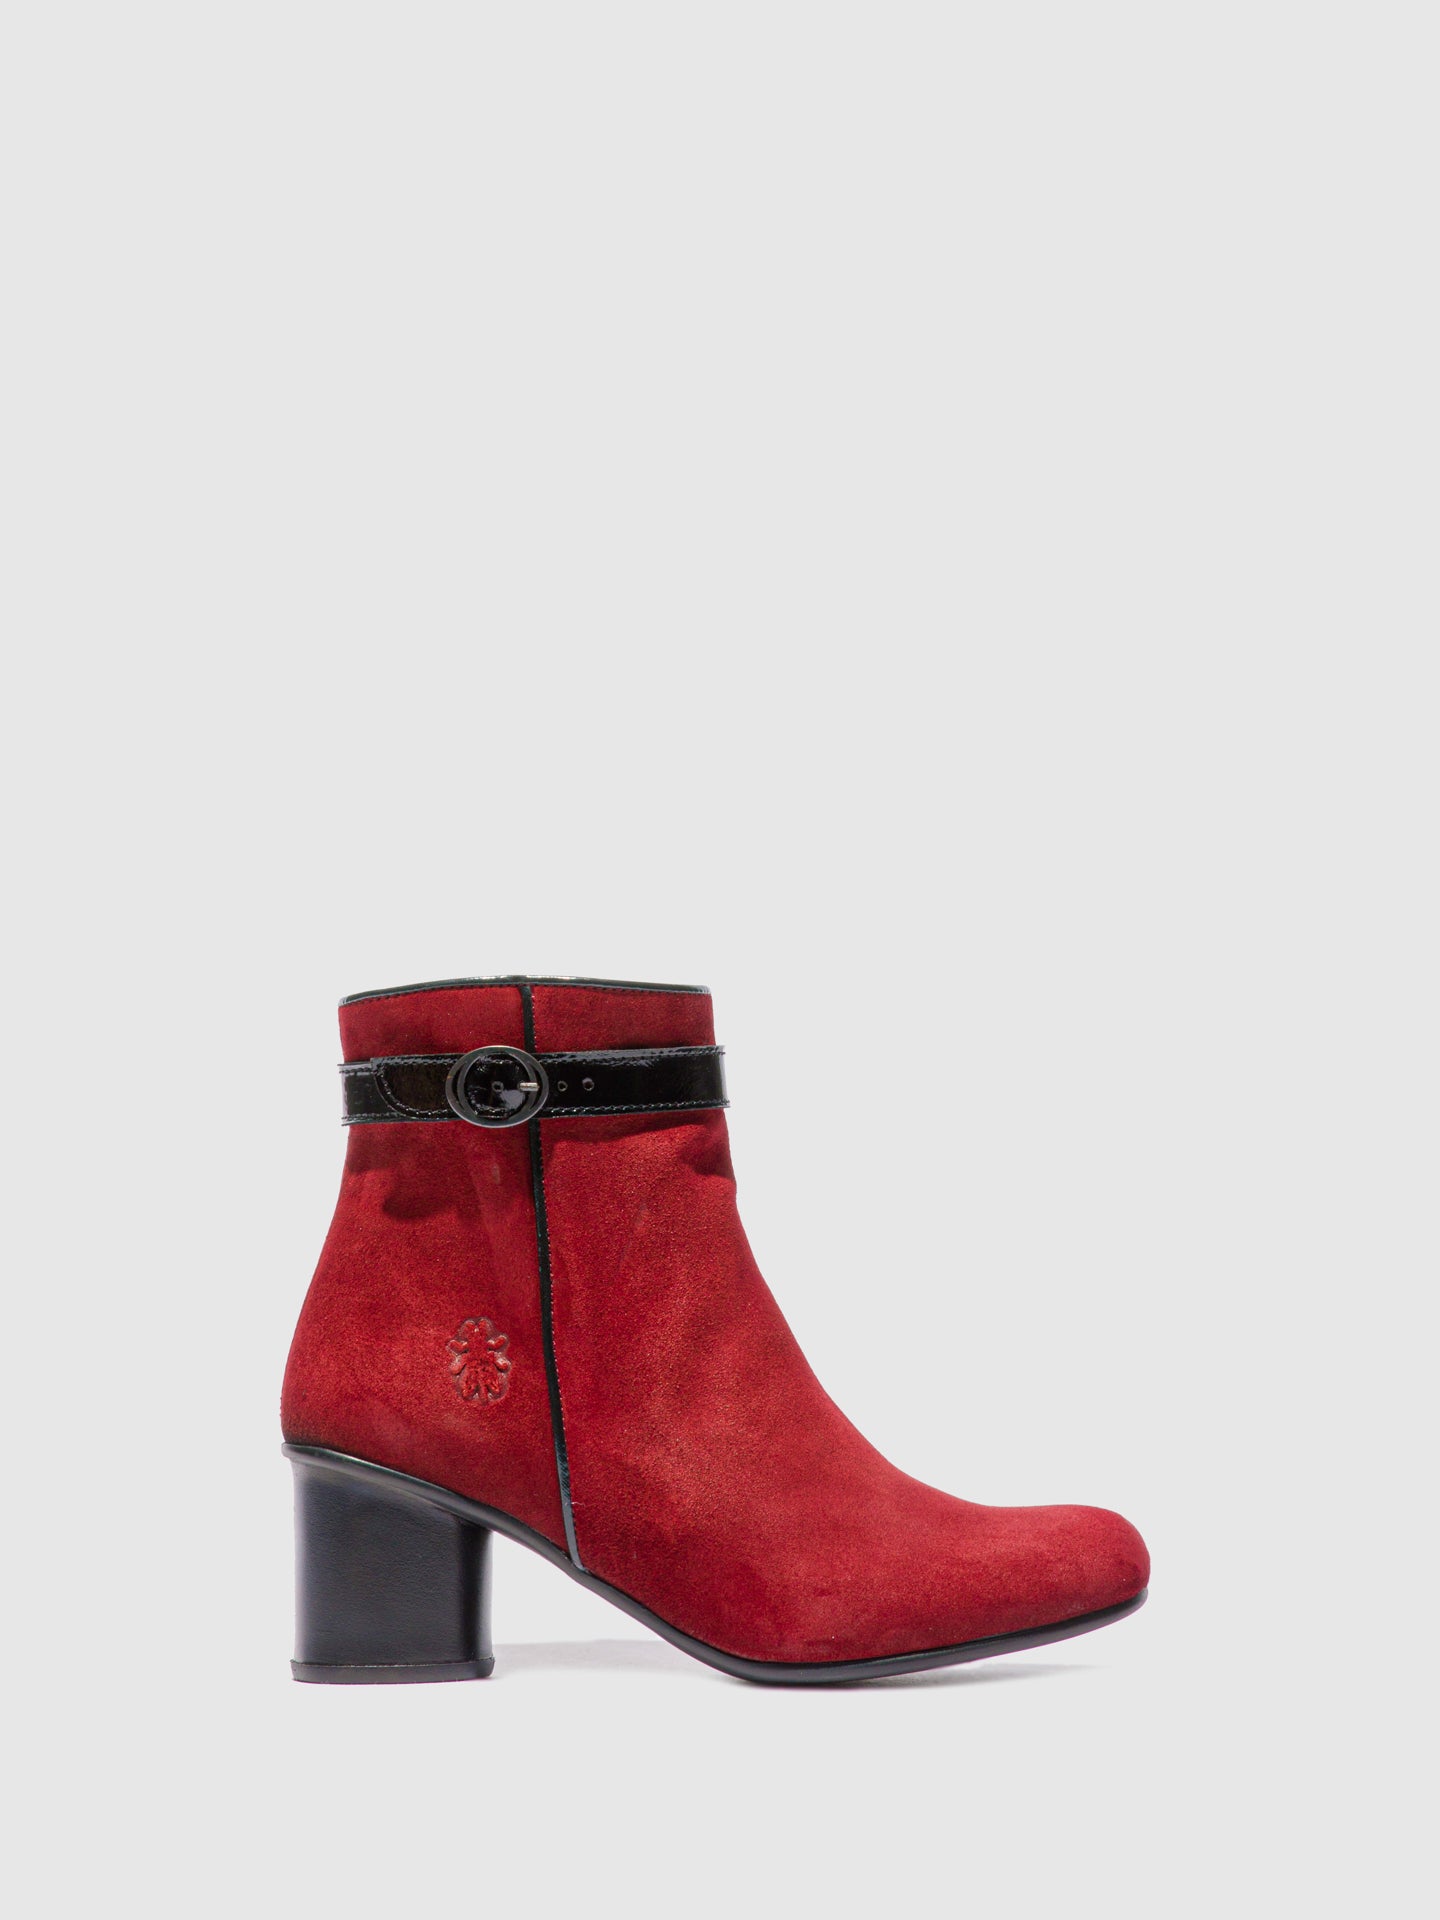 Fly London Zip Up Ankle Boots SAKO810FLY RANCH/LUXOR DK RED/BLACK